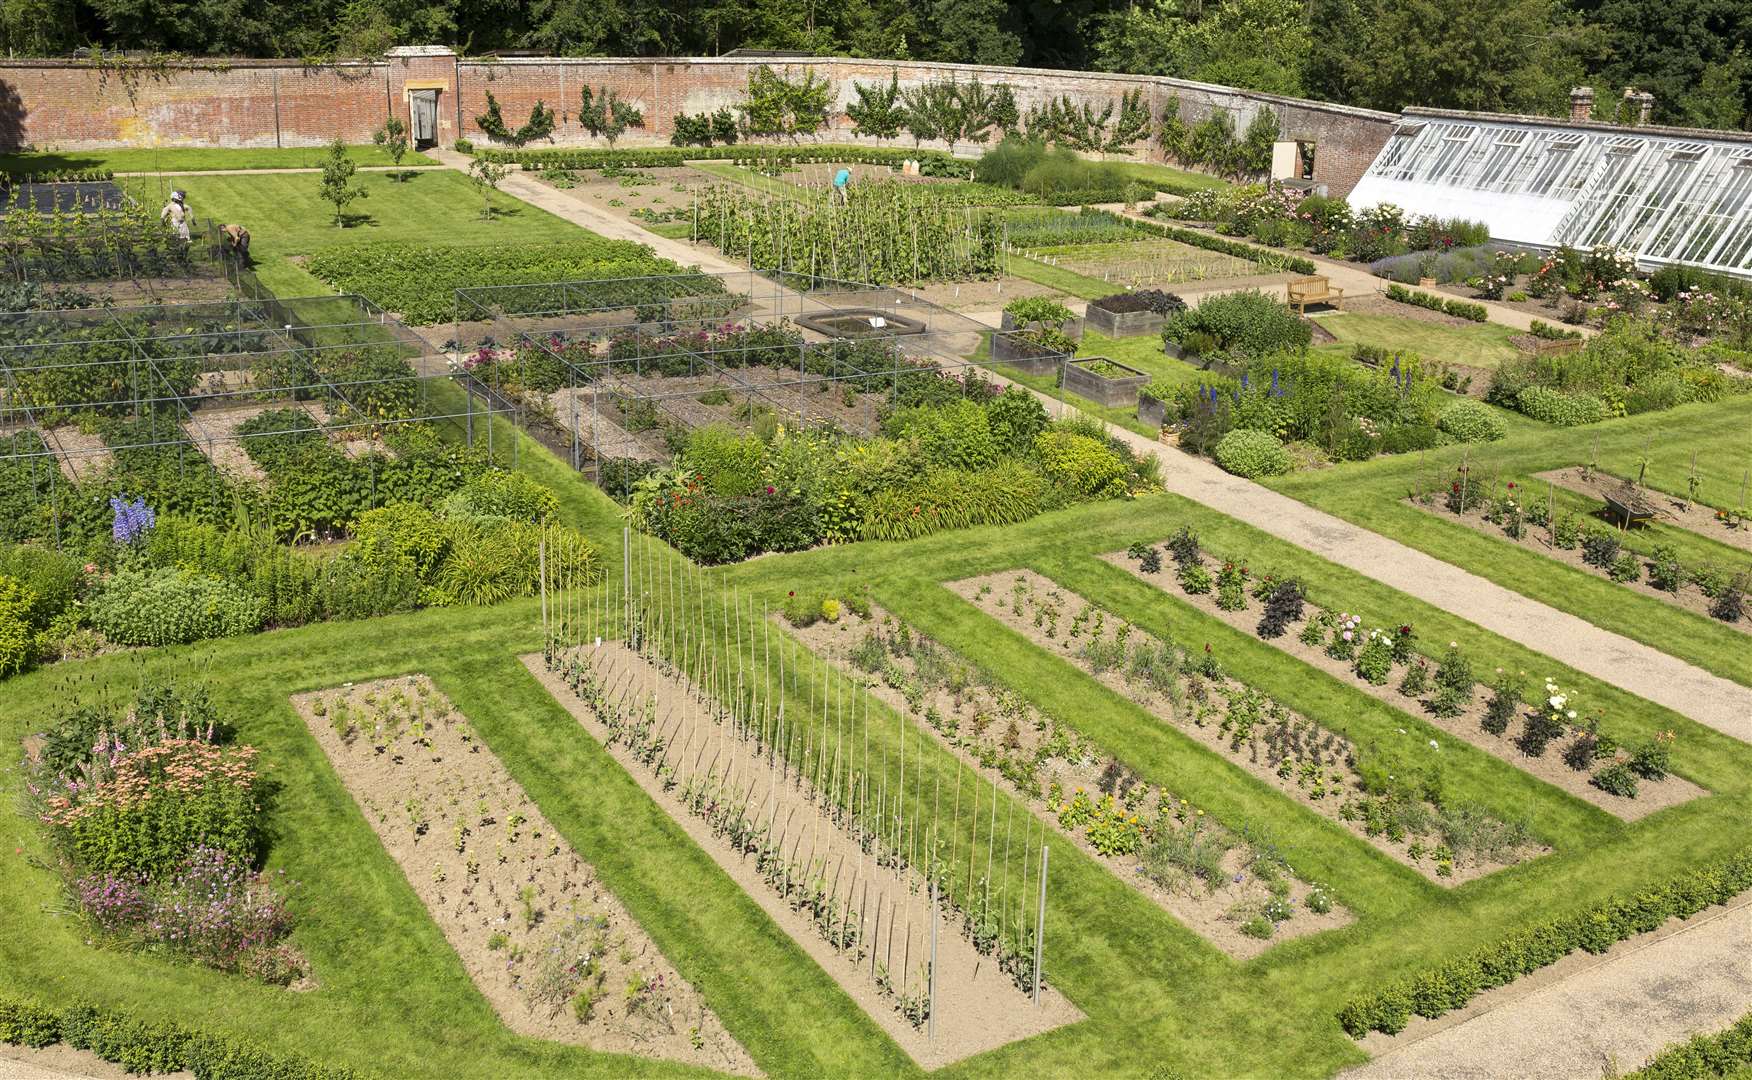 The walled garden at Scotney Castle Picture: National Trust